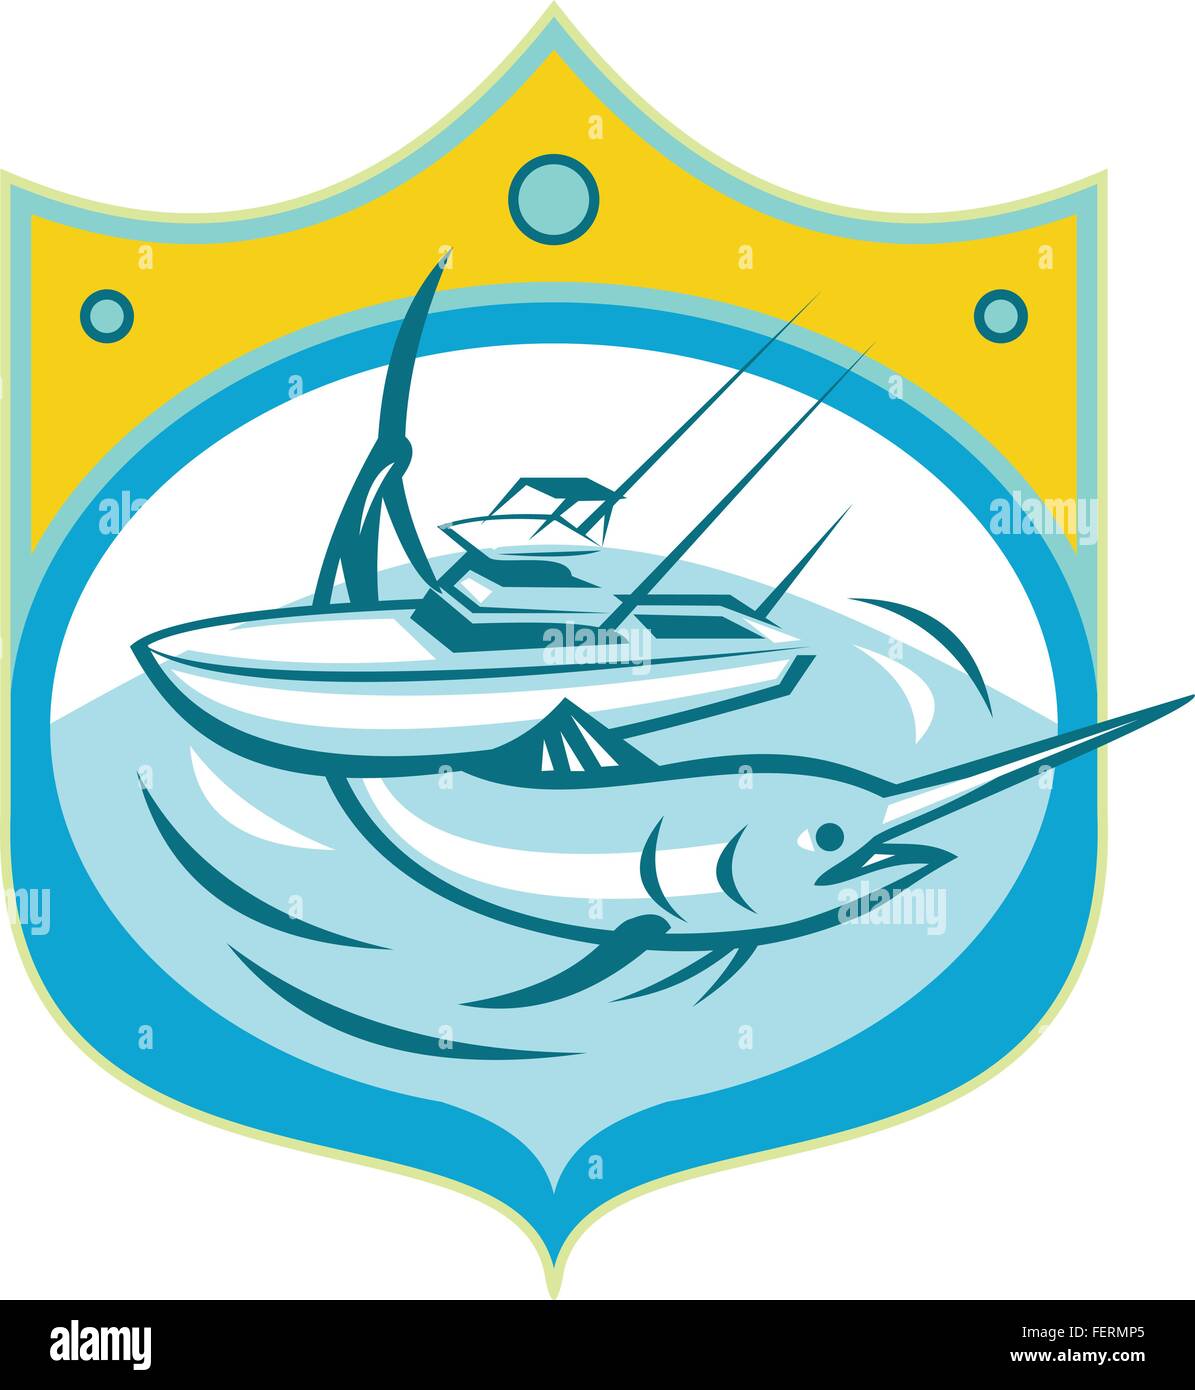 Illustration of a blue marlin and charter fishing boat in sea set inside shield crest done in retro style. Stock Vector